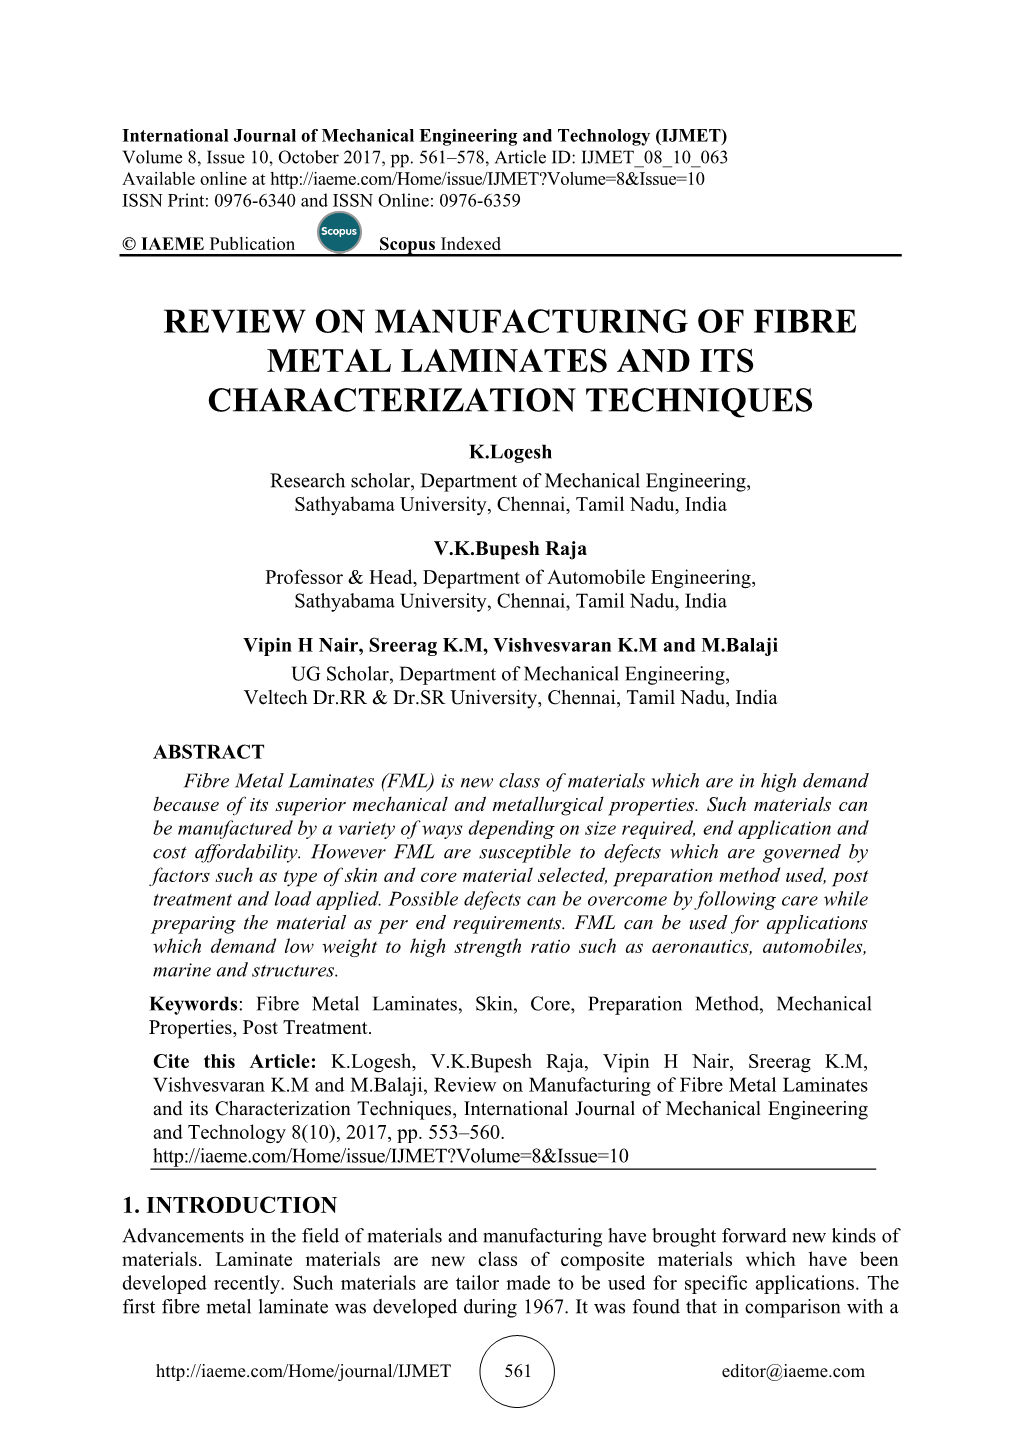 Review on Manufacturing of Fibre Metal Laminates and Its Characterization Techniques